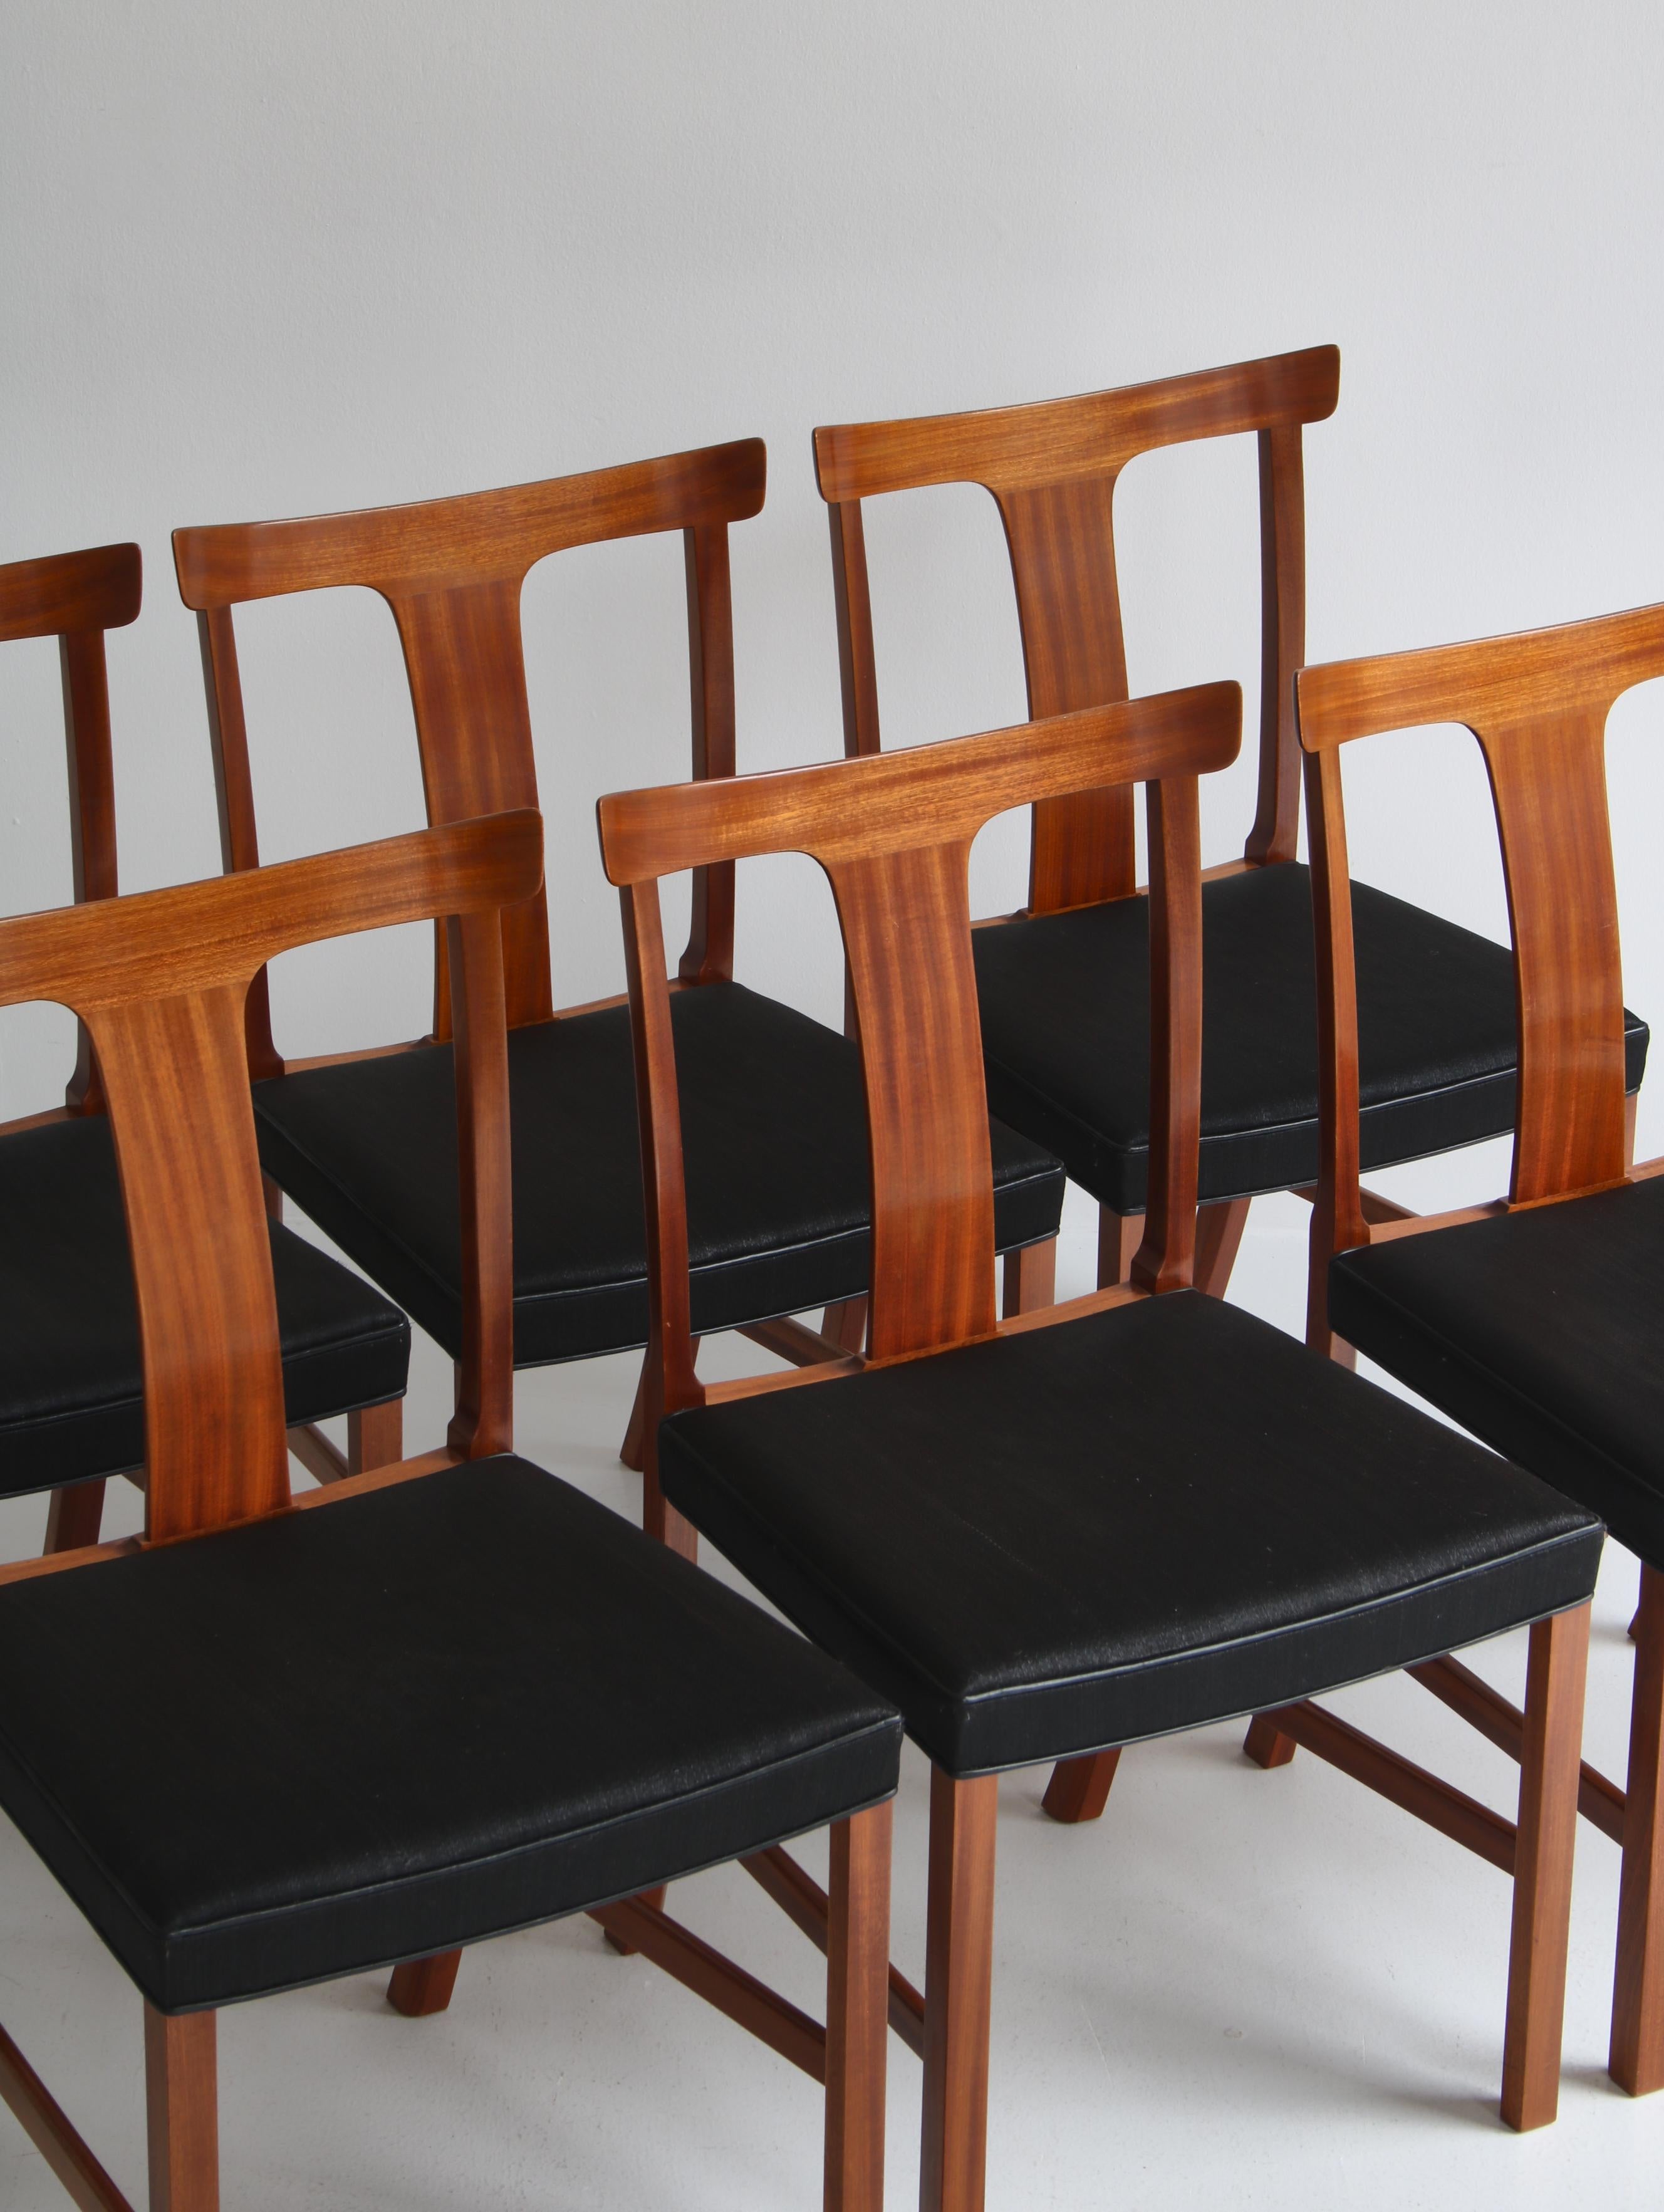 Ole Wanscher Dining Chairs in Mahogany and Horsehair Made by A.J. Iversen, 1960s In Good Condition For Sale In Odense, DK